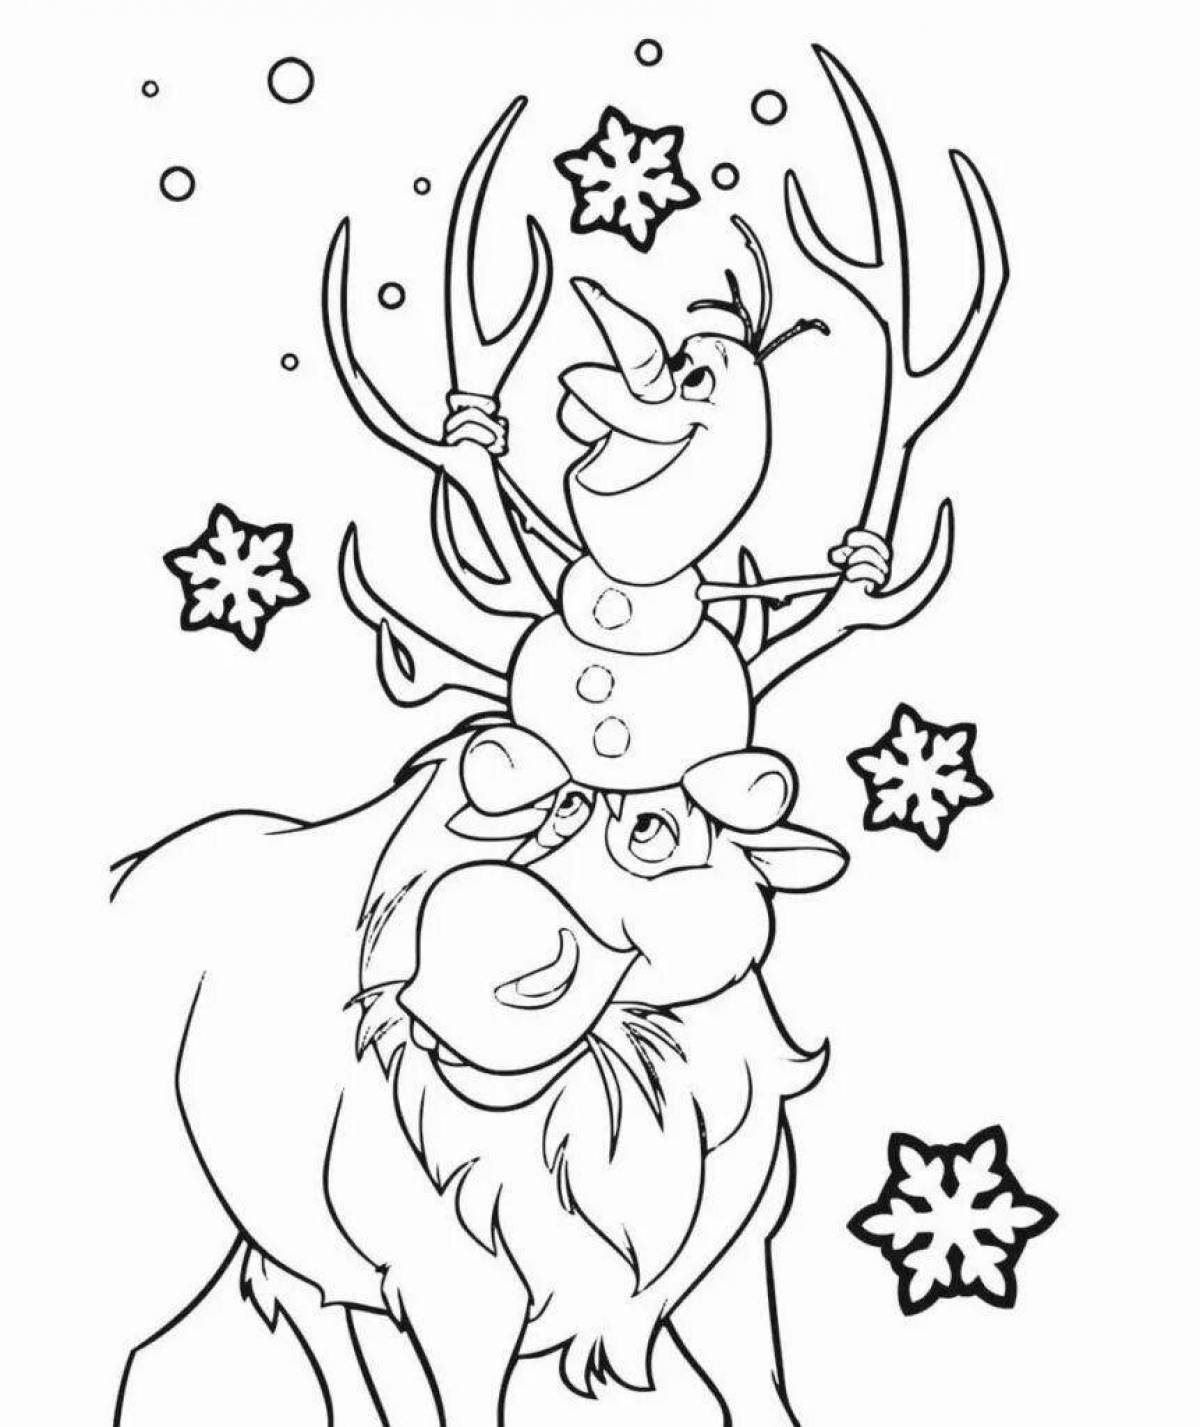 Great Christmas reindeer coloring book for kids